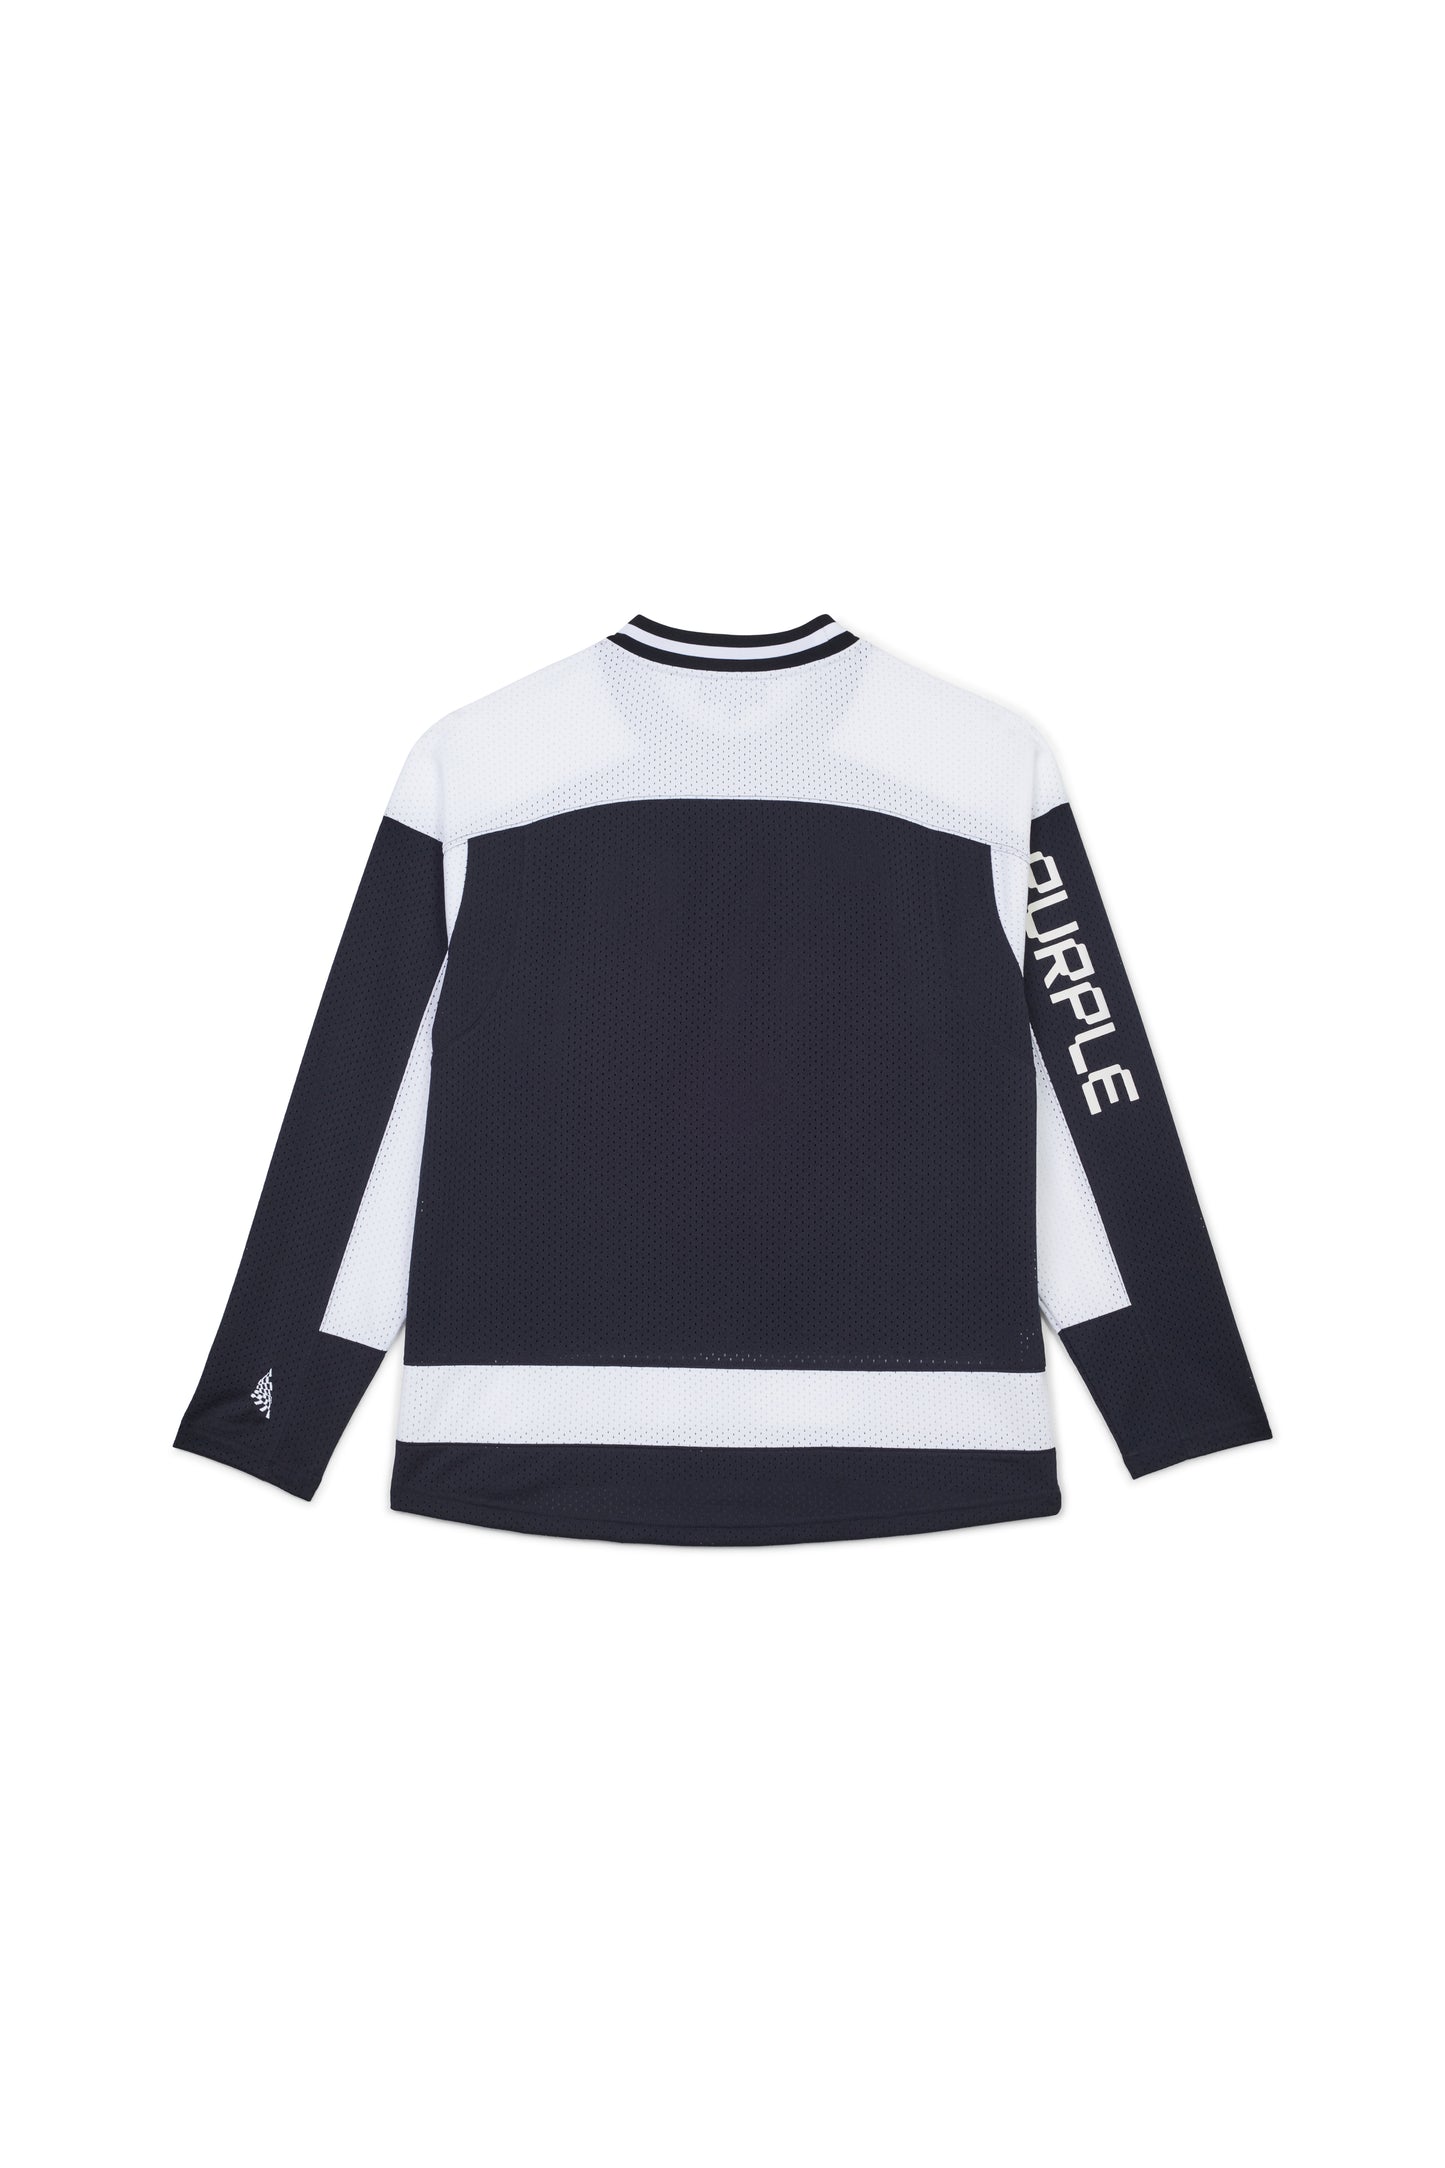 P206 ATHLETIC JERSEY - Black and White